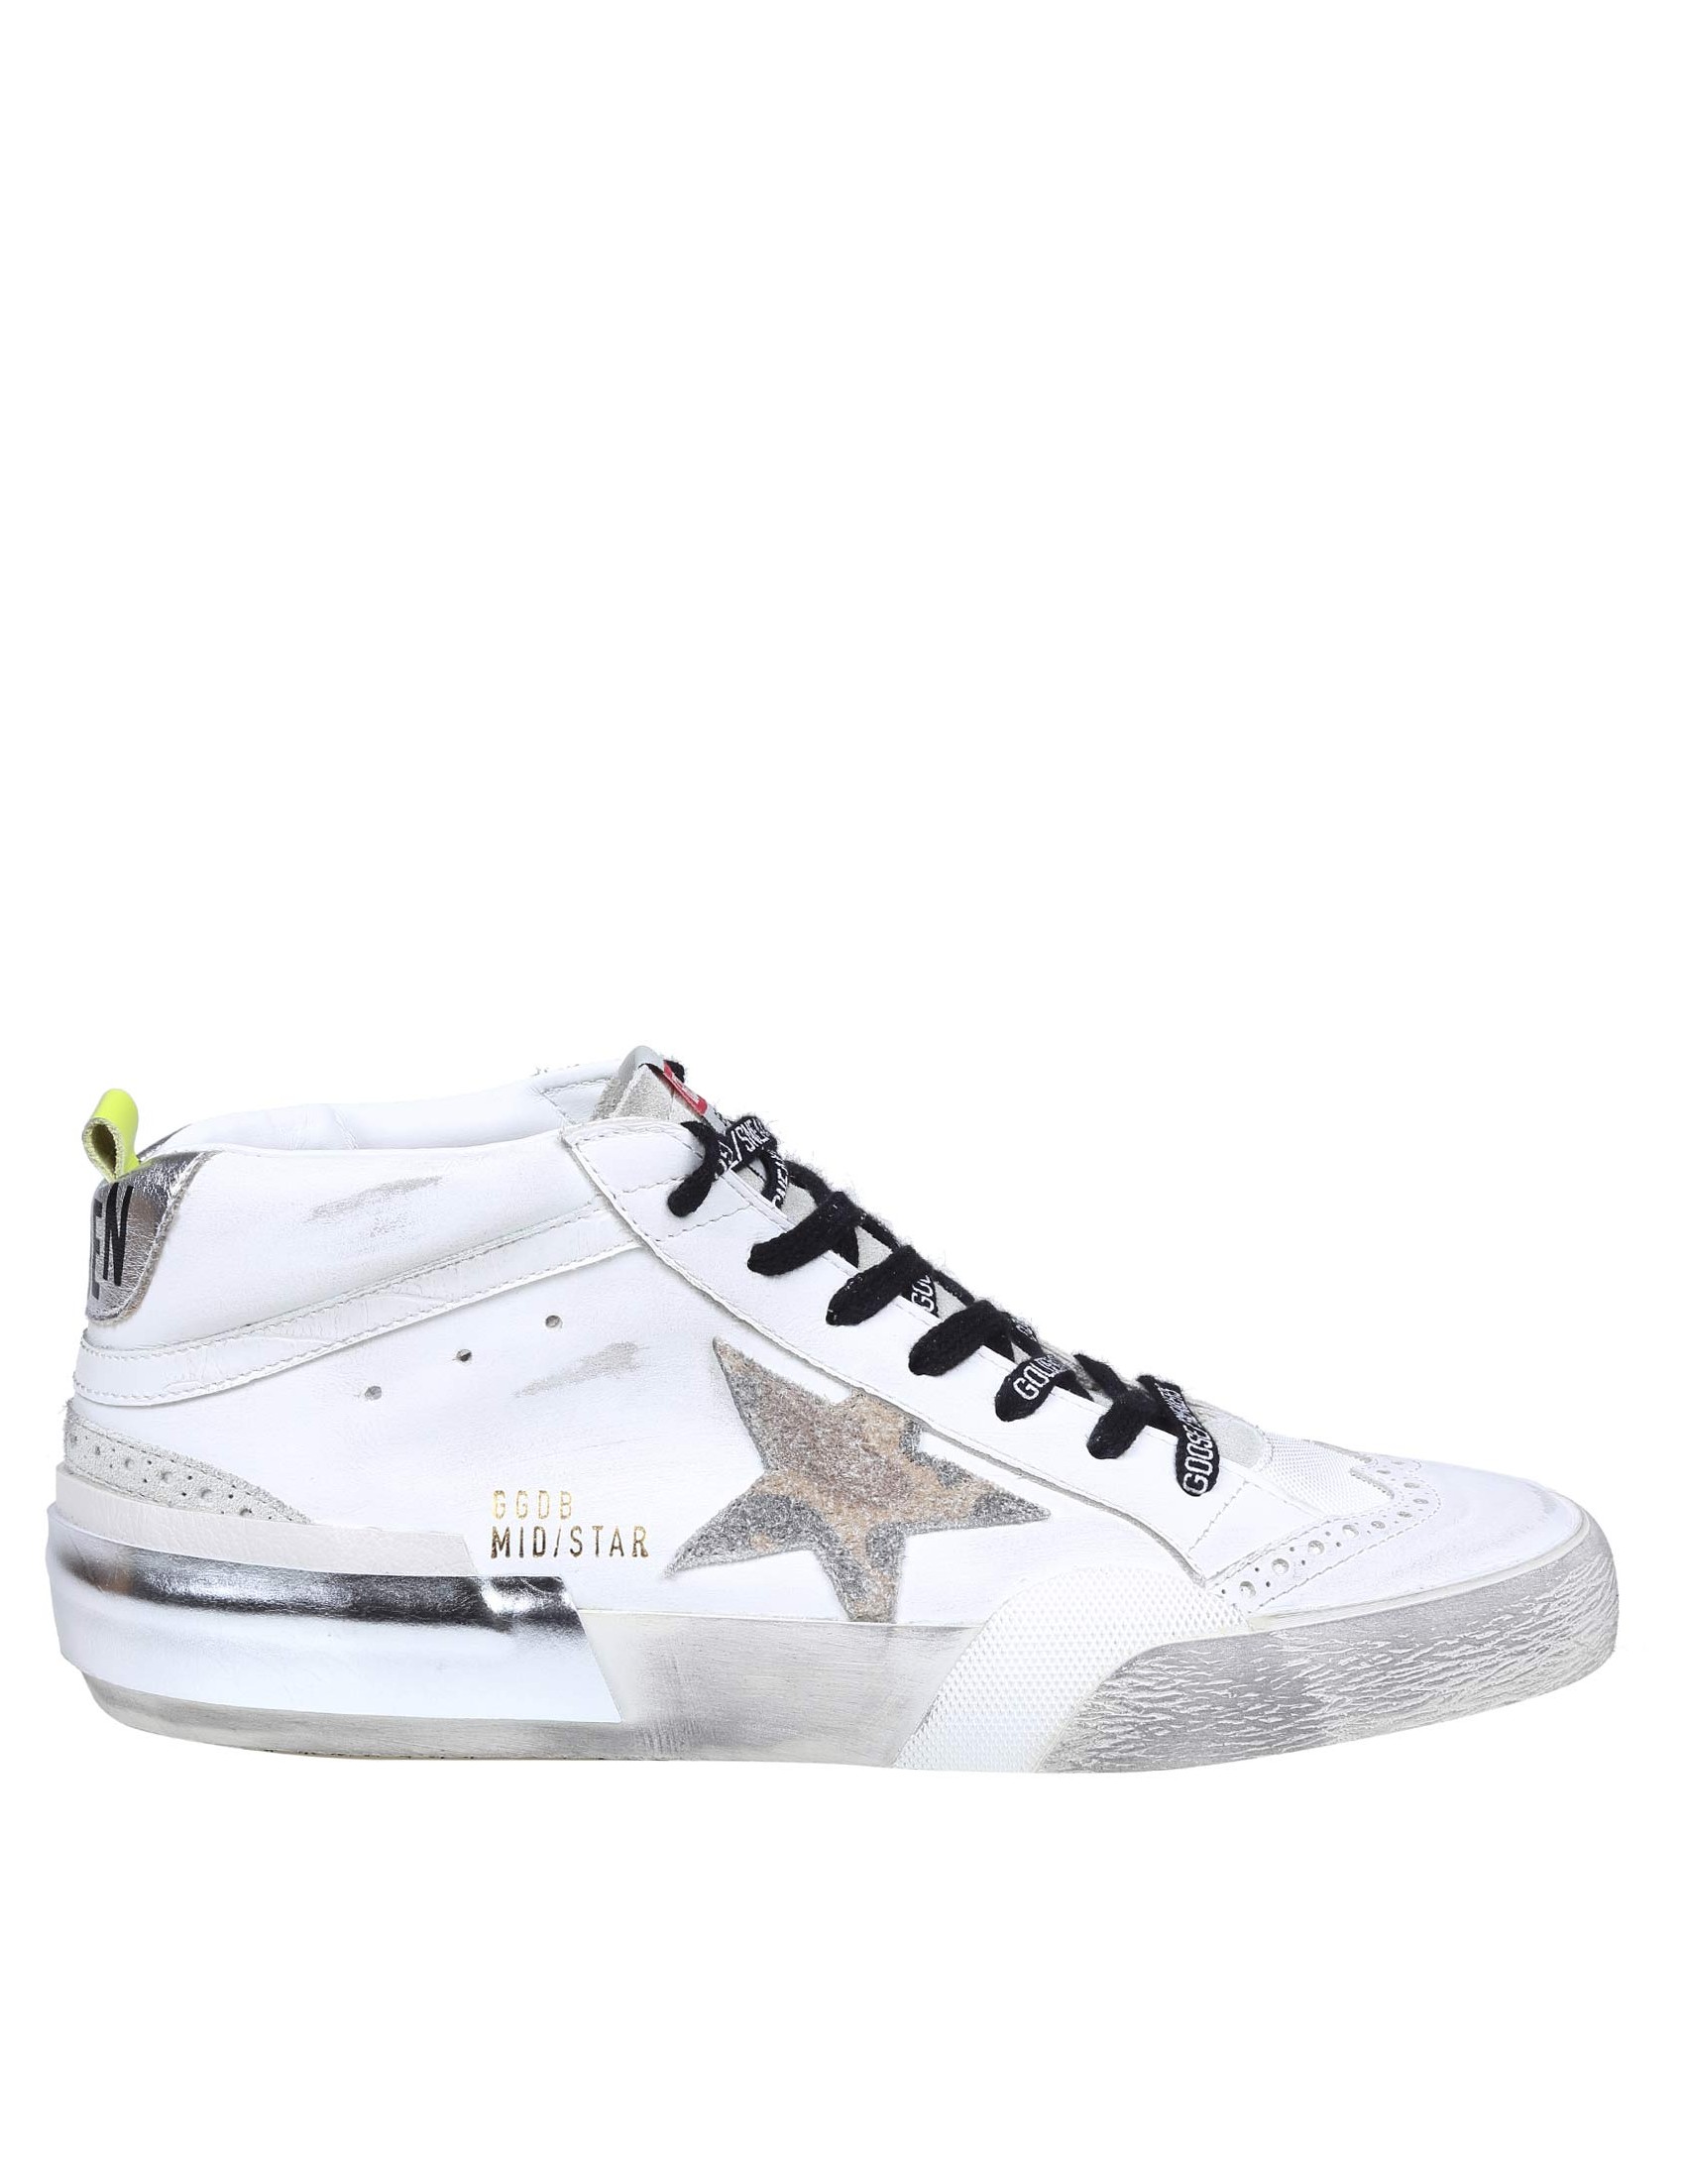 GOLDEN GOOSE MID STAR SNEAKERS IN WHITE LEATHER